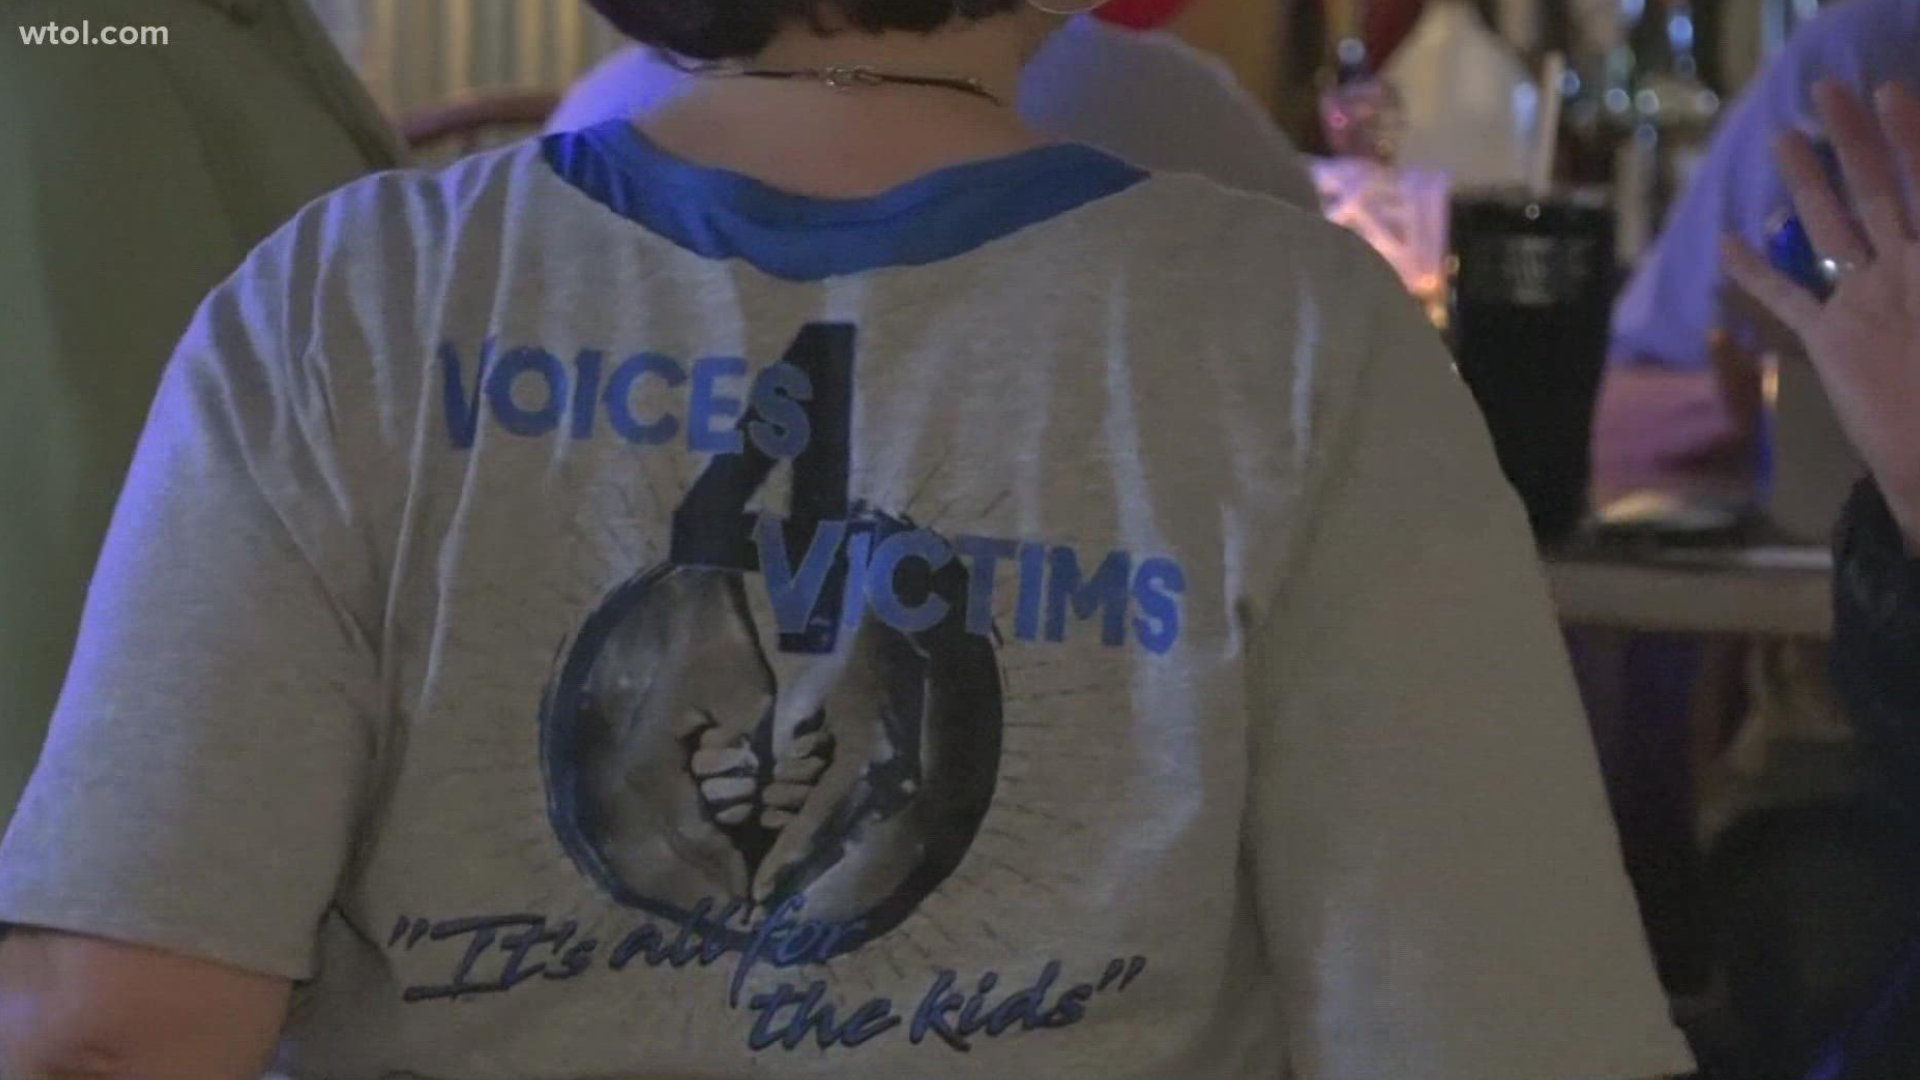 Lisa Lauro, founder of Voices 4 Victims, says "unfortunately some of these children aren't feeling that love and that concern and they're heartbroken."